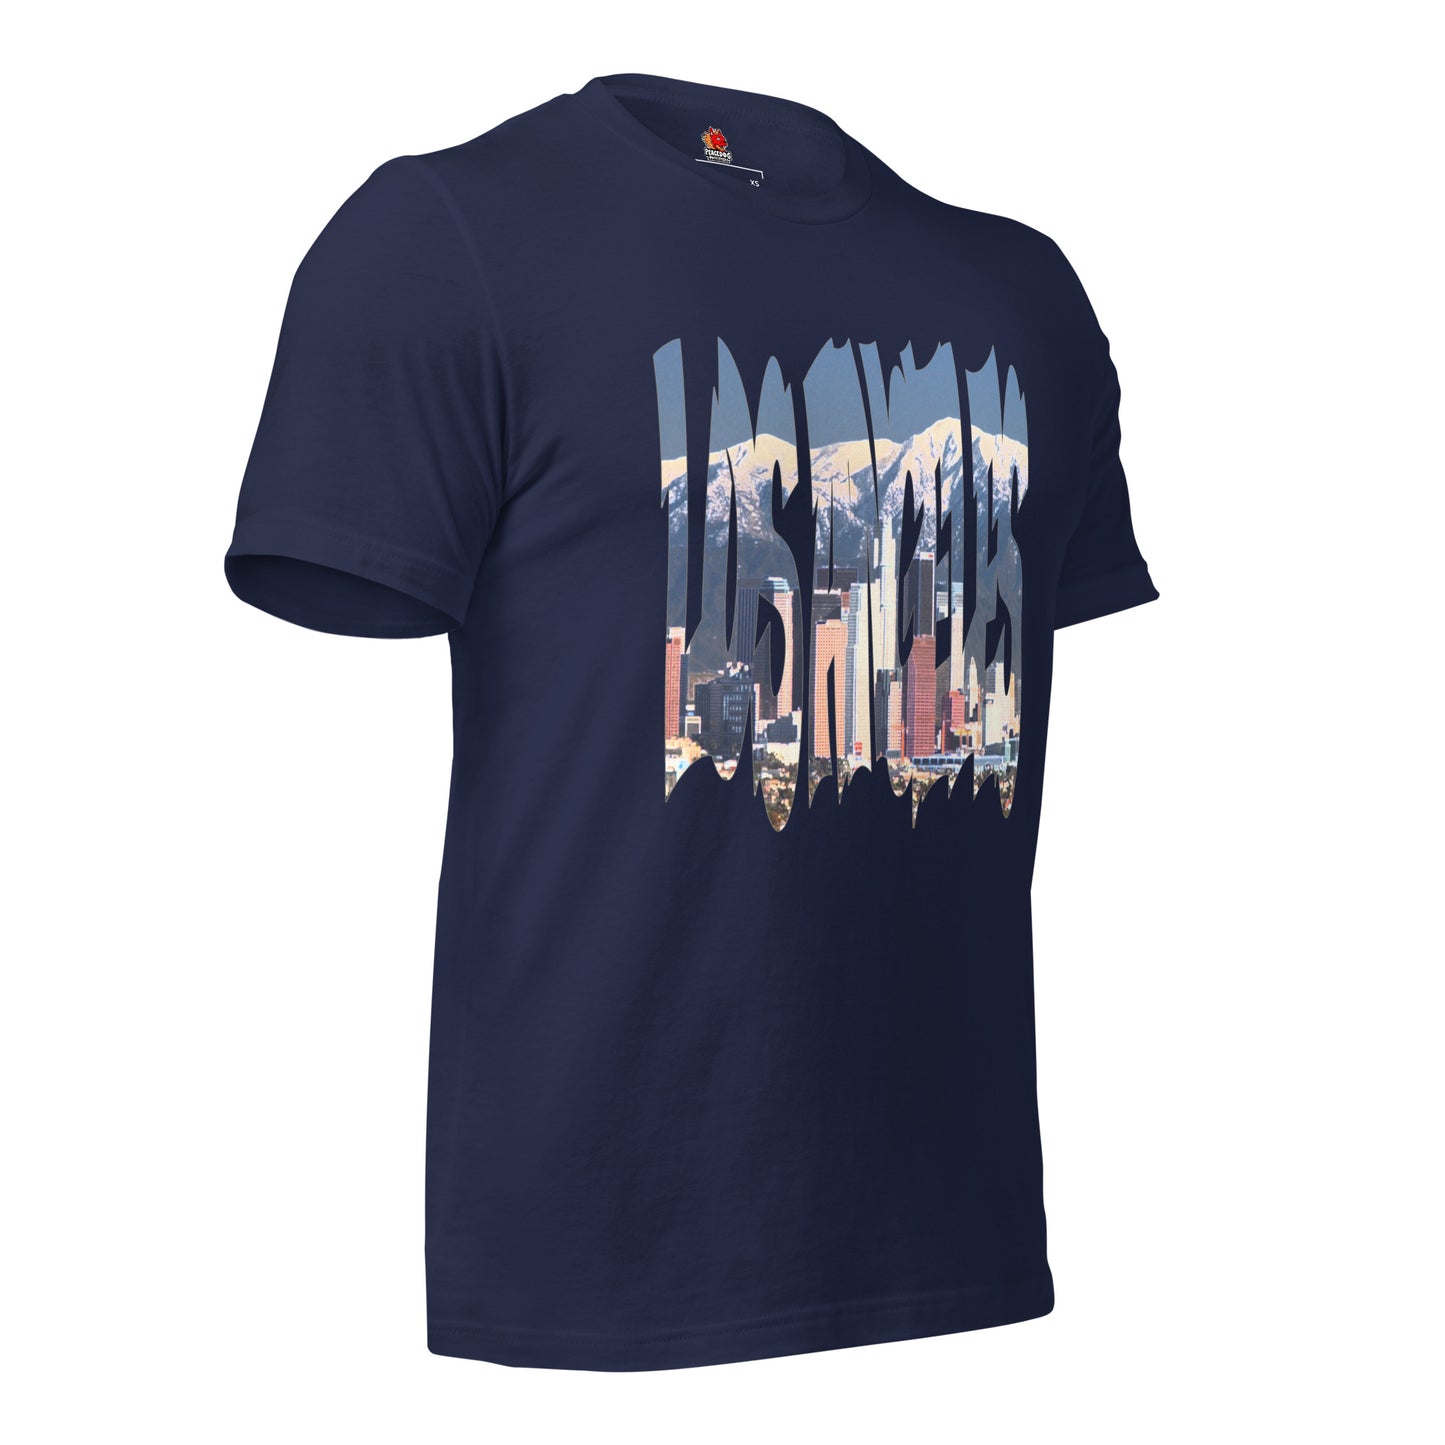 Los Angeles Skyline Typography Front Print T-shirt